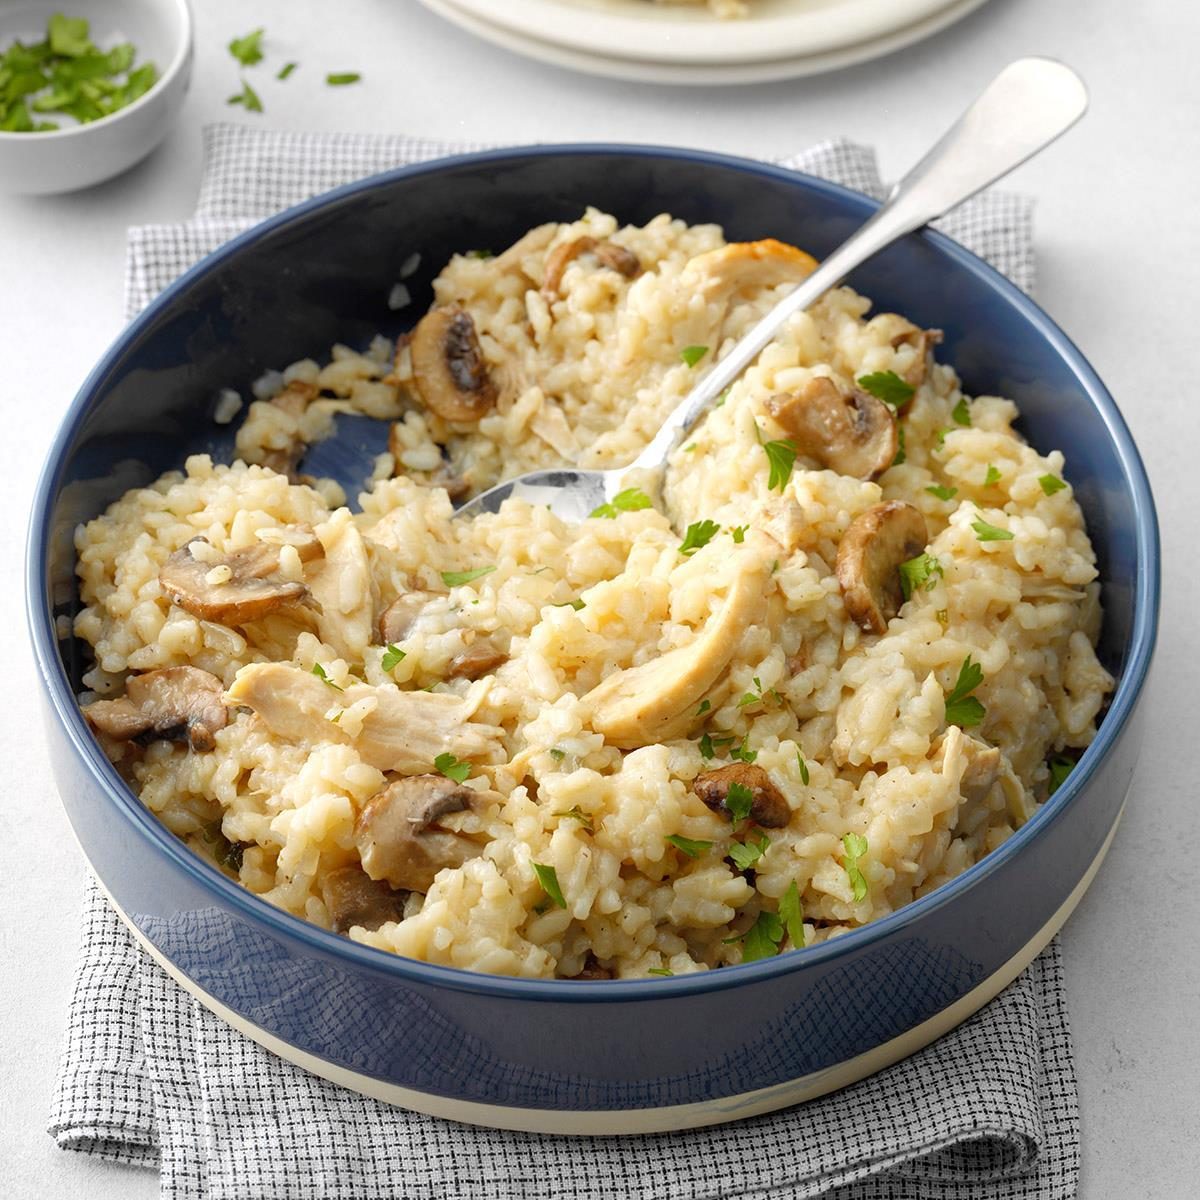 Pressure Cooker Risotto With Chicken And Mushrooms Exps Dai19 206289 B02 13 2b 19